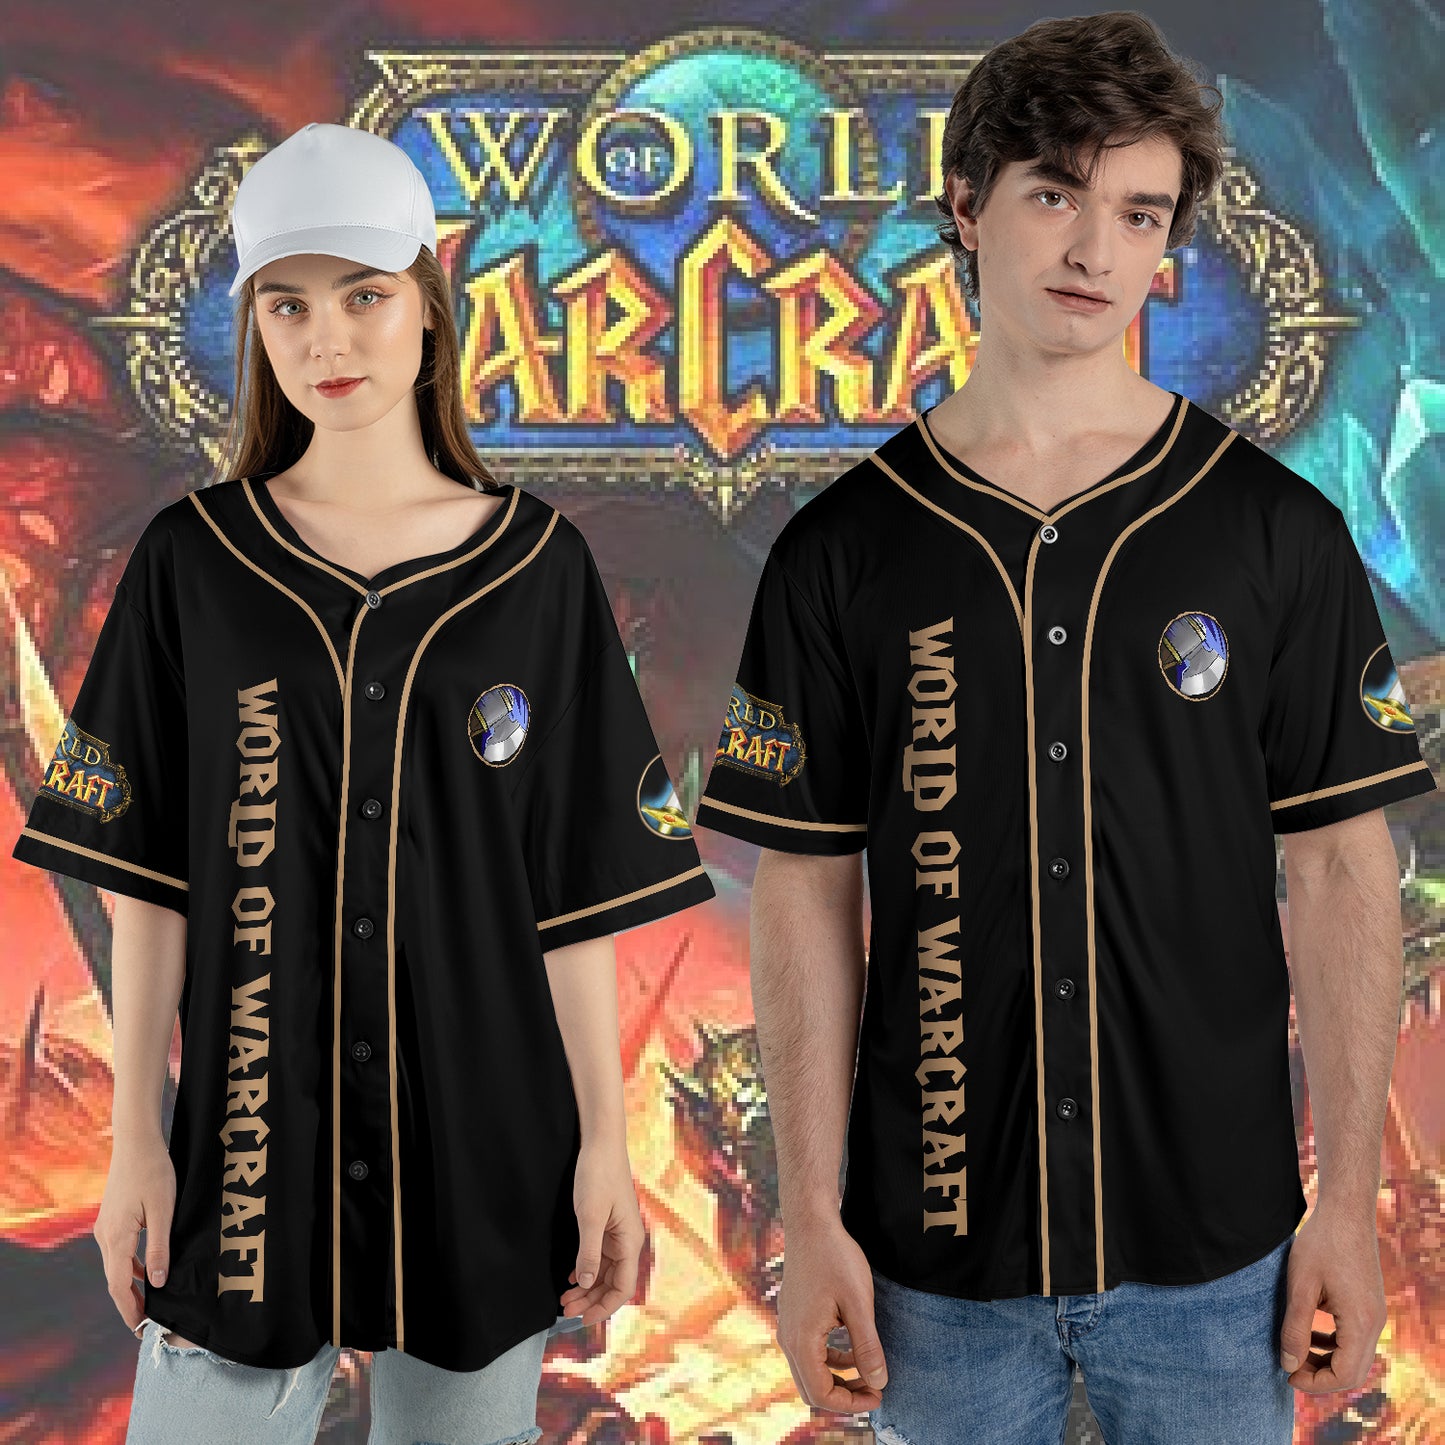 Wow Class Arms Warrior Guide AOP Baseball Jersey Without Piping